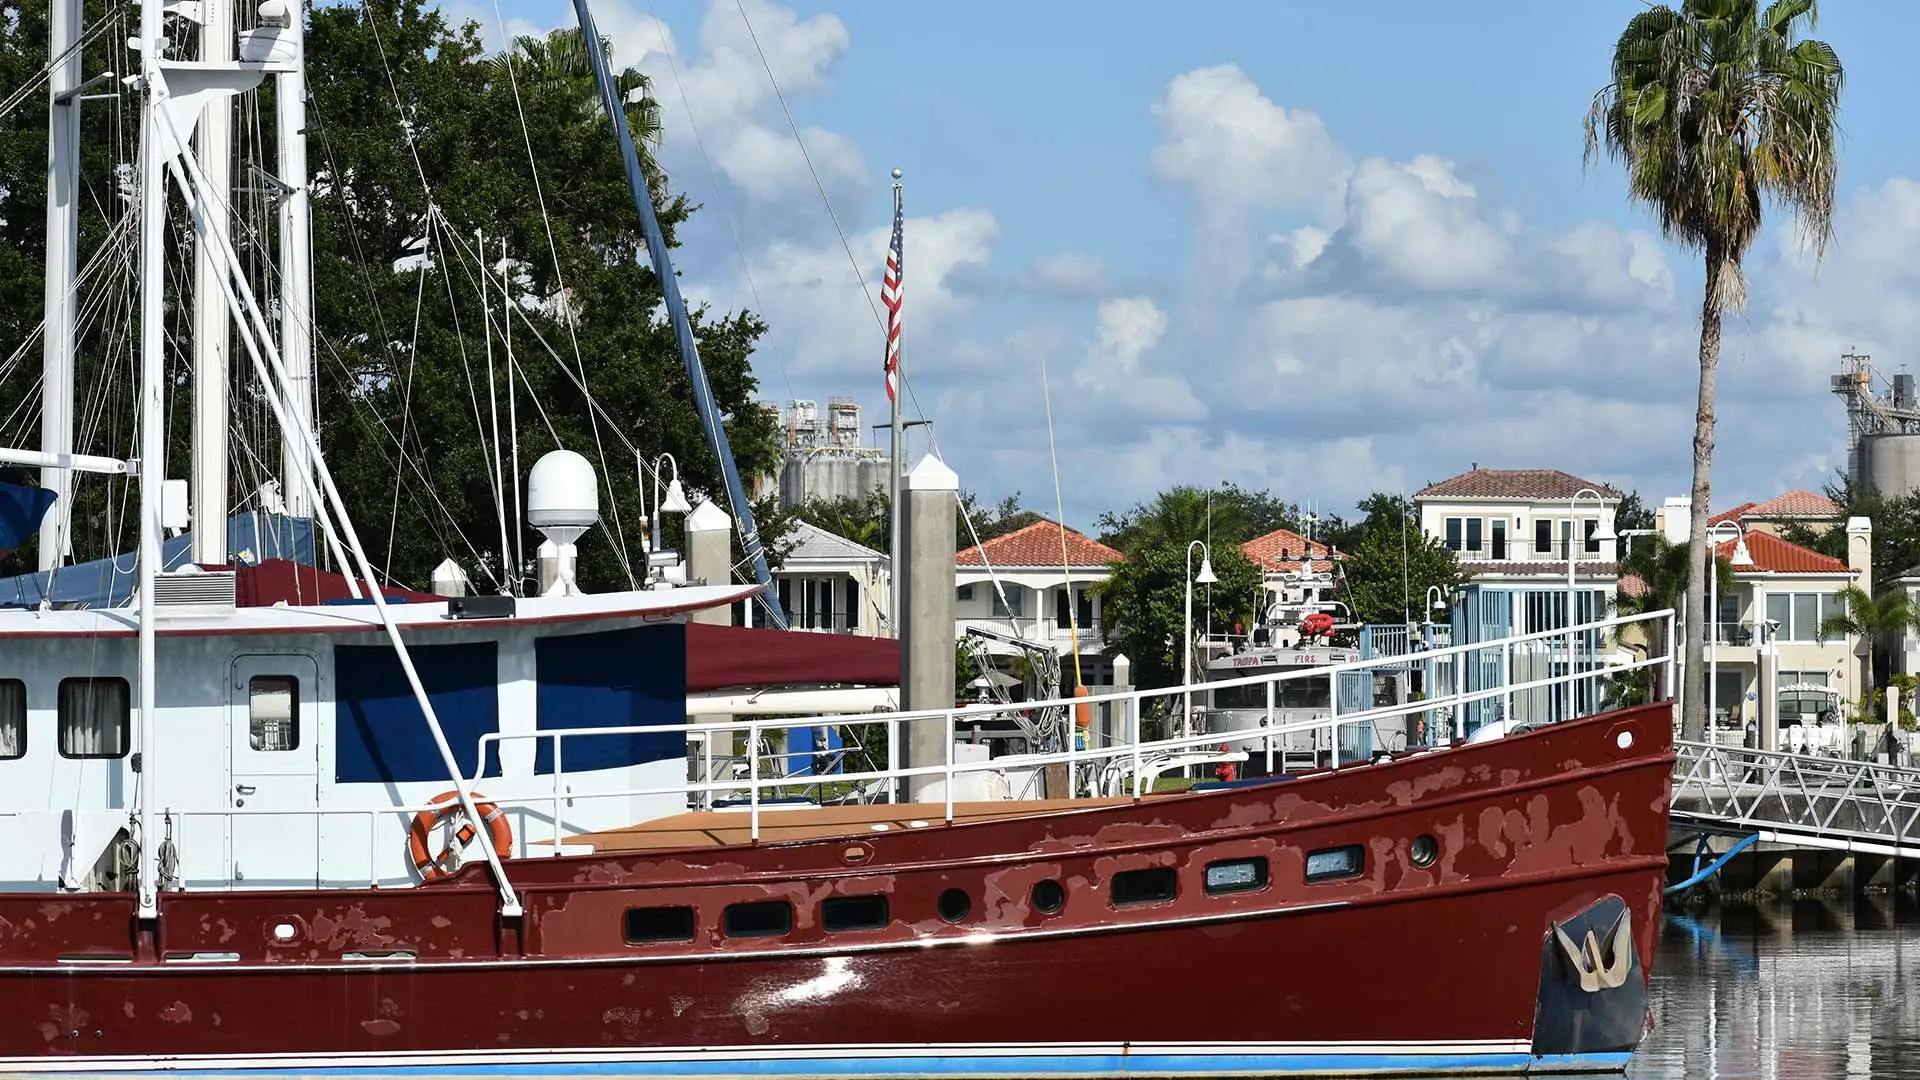 Private boats harbored and secured in Tampa Bay, FL.